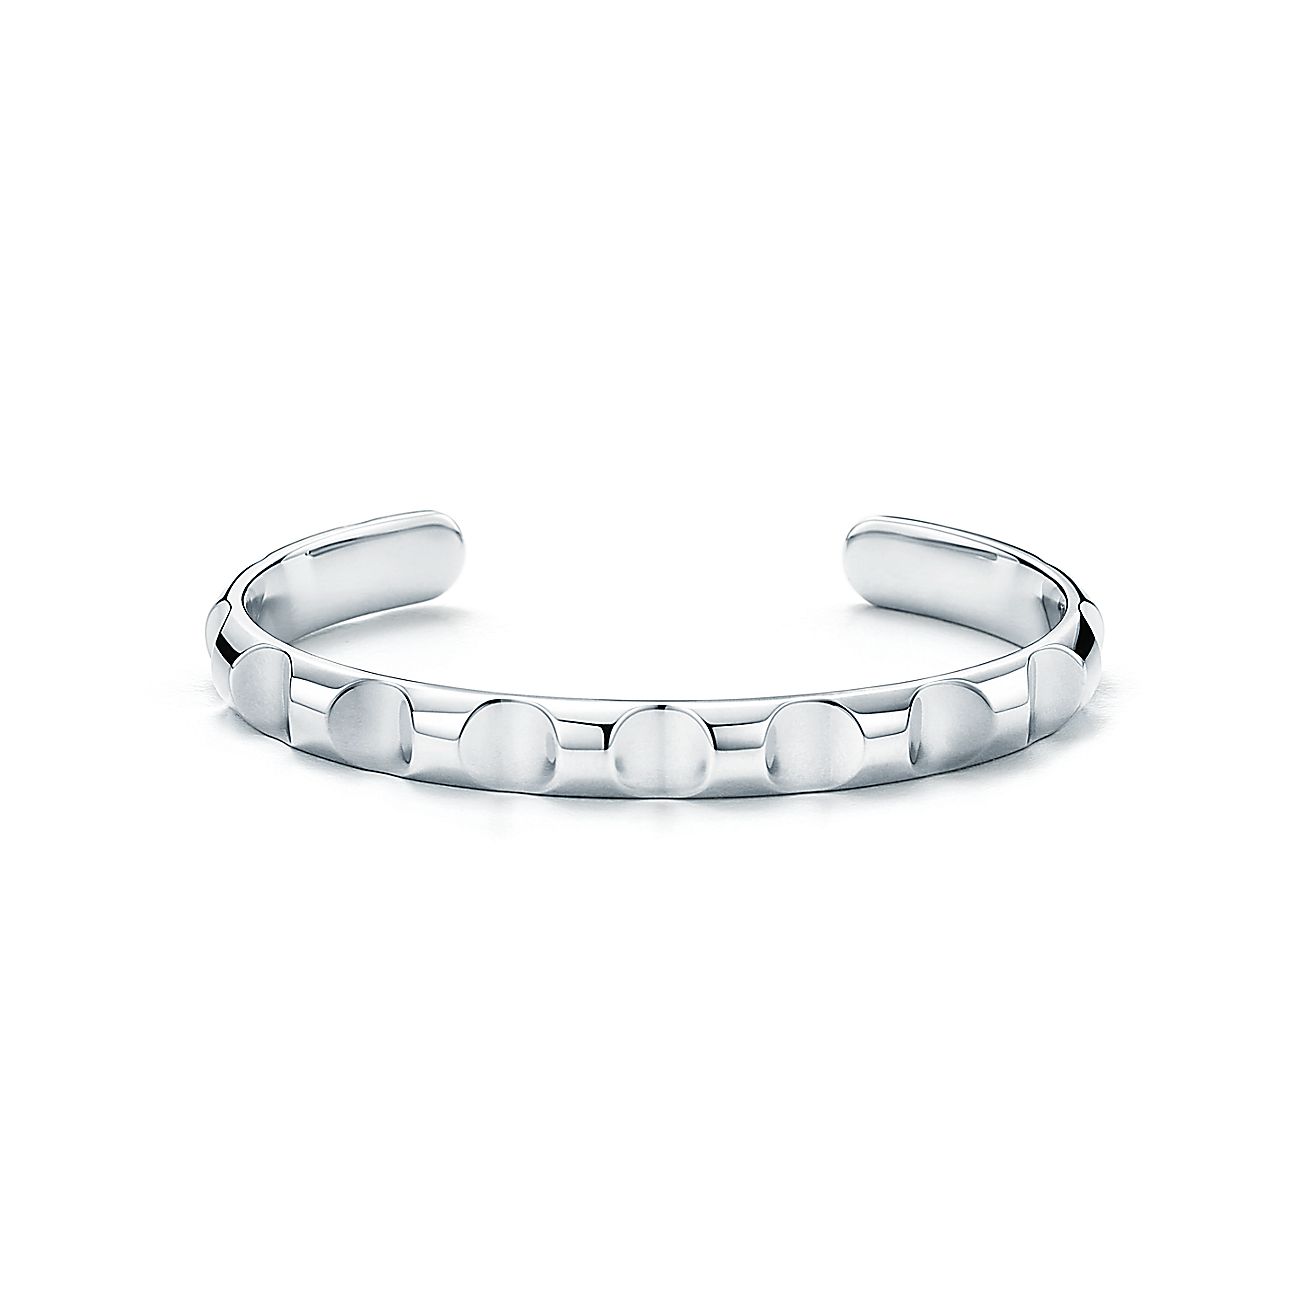 Paloma's Groove narrow cuff in sterling silver, medium. | Tiffany & Co.